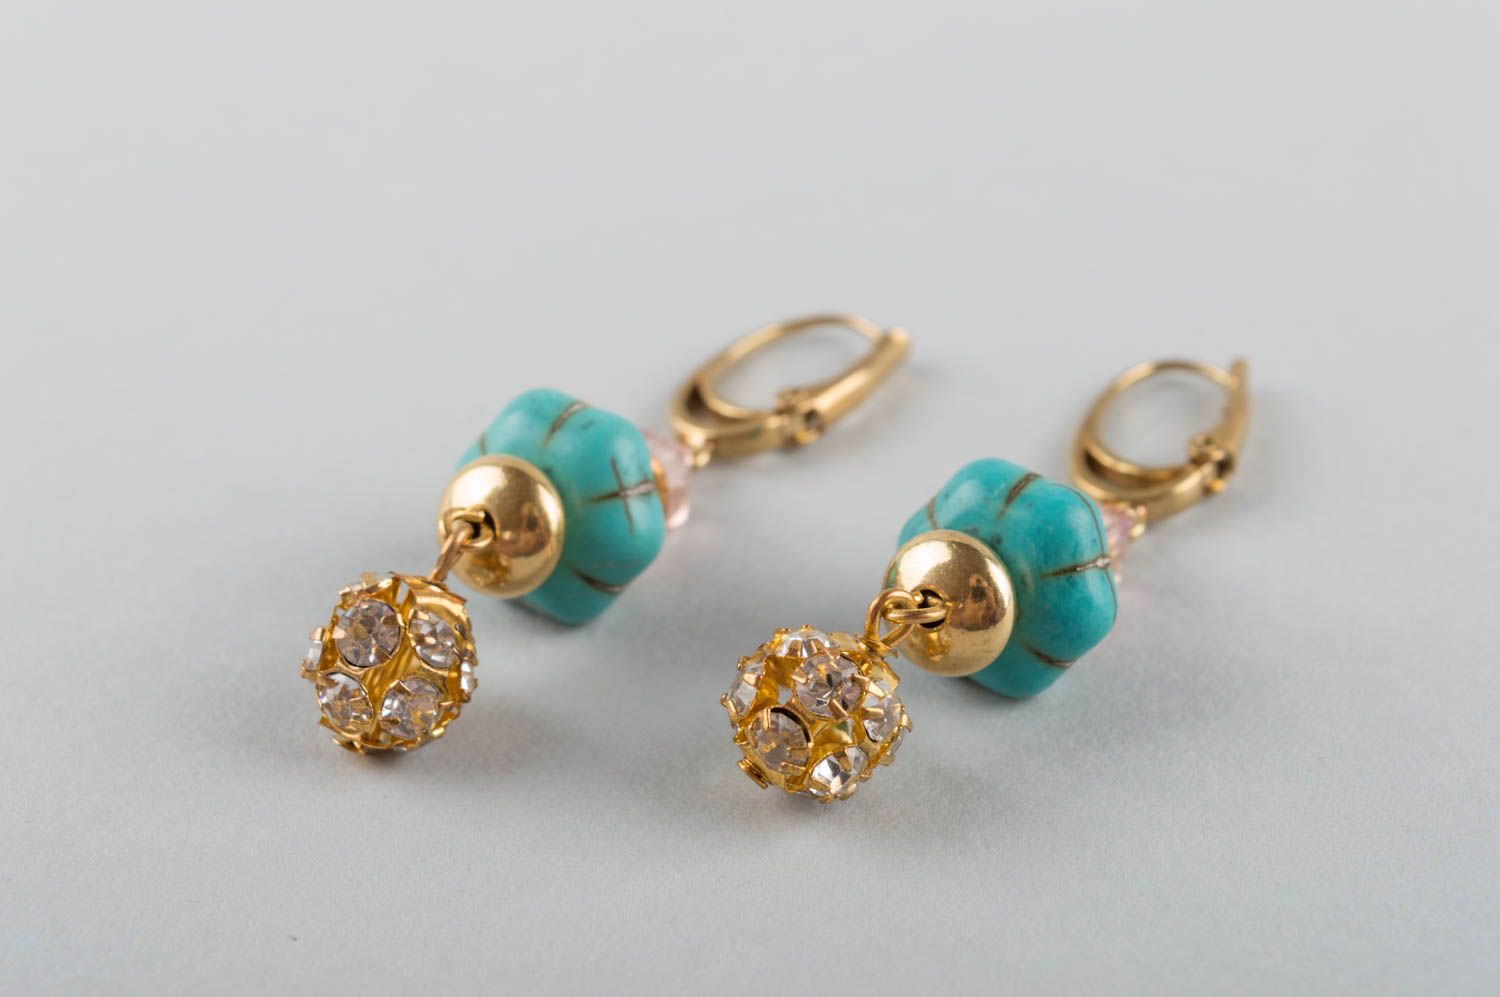 Earrings with natural stone charms brass jewelry beautiful turquoise accessory photo 3